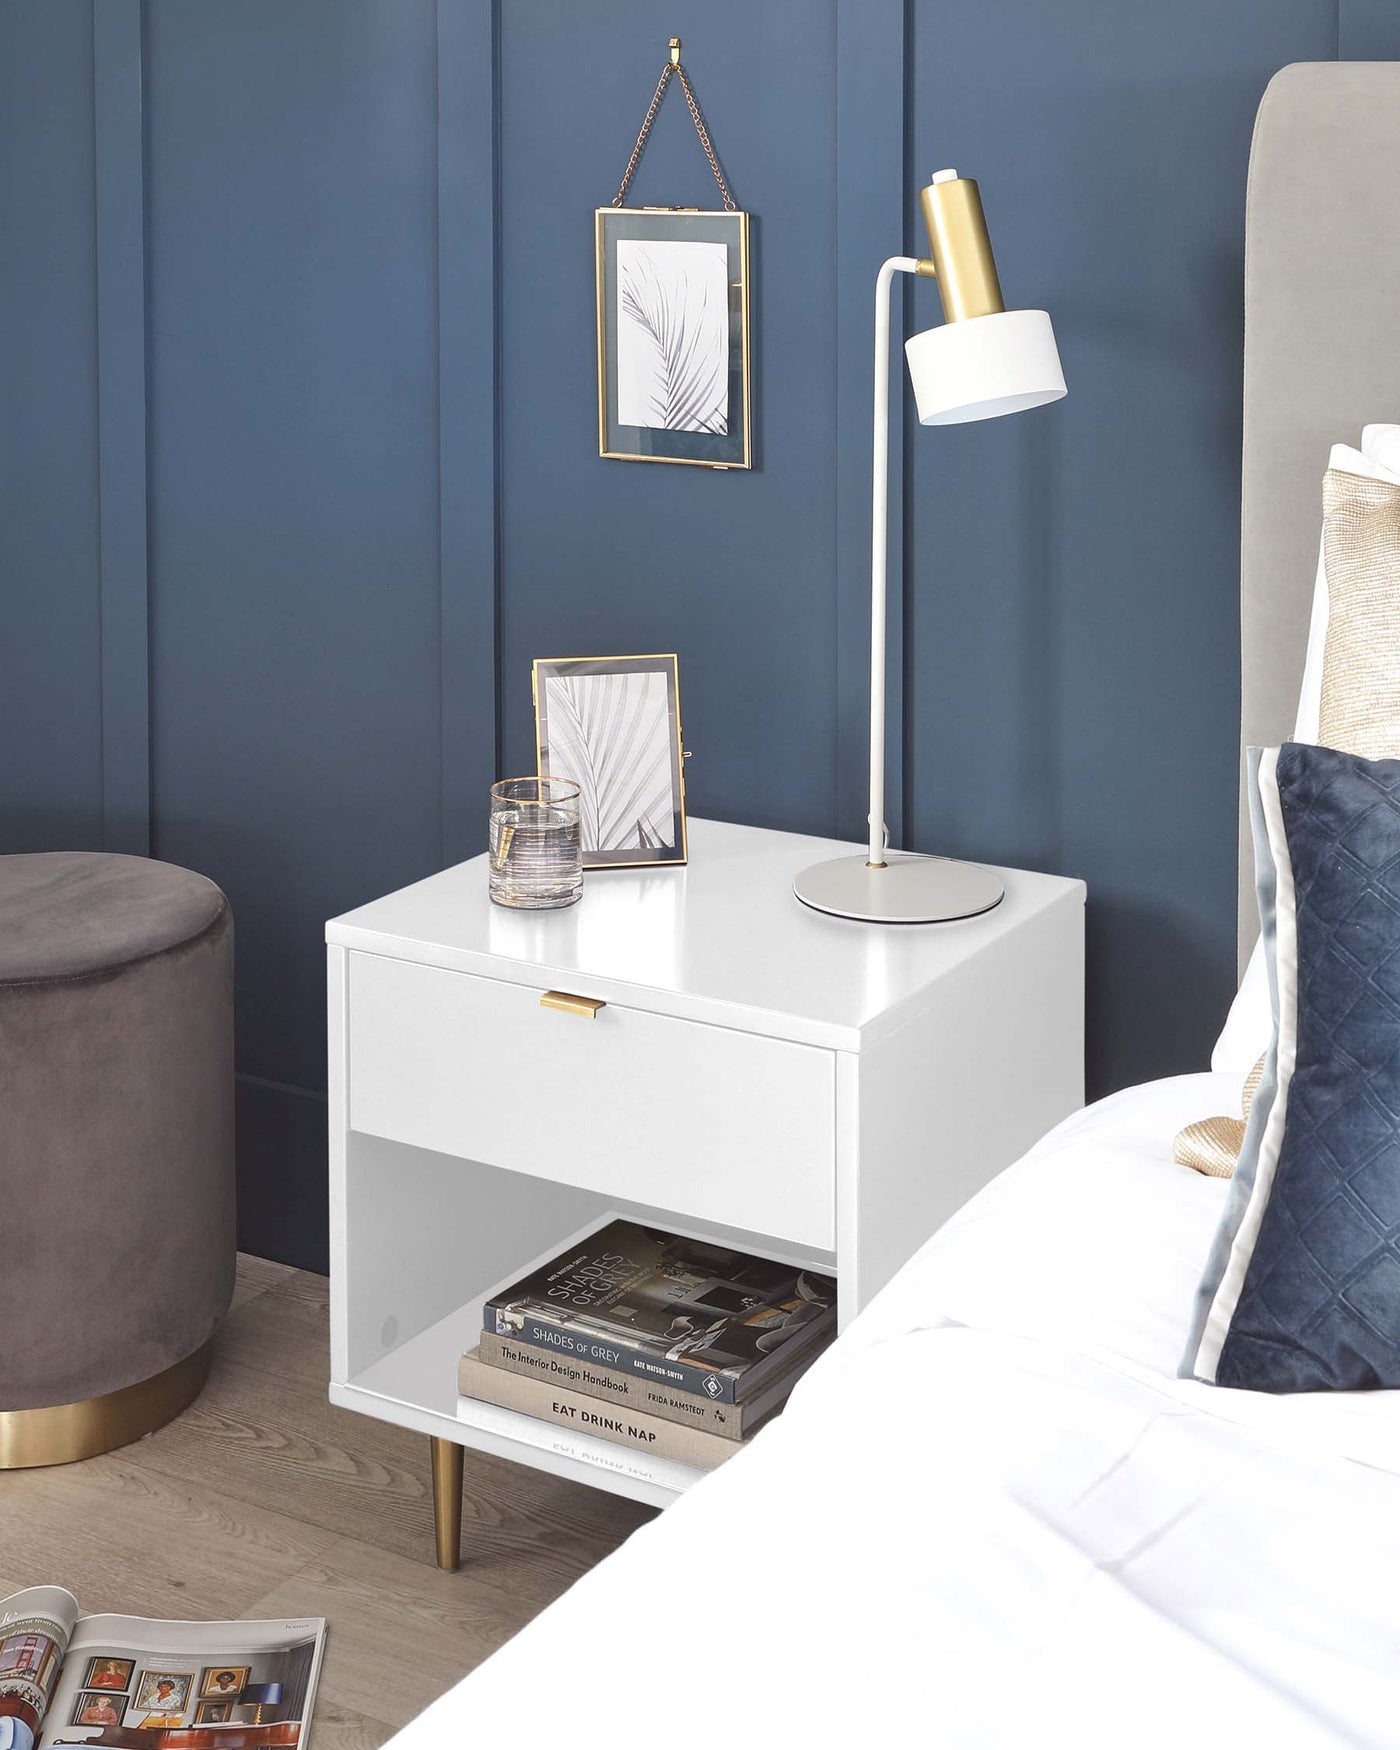 Modern white bedside table with a sleek design, featuring a single drawer with a gold-coloured handle, an open lower shelf with space for books, and a tabletop supporting various decorative items. A round upholstered ottoman with a velvet finish and gold base is partially visible to the left. The pieces exude contemporary elegance and functionality.